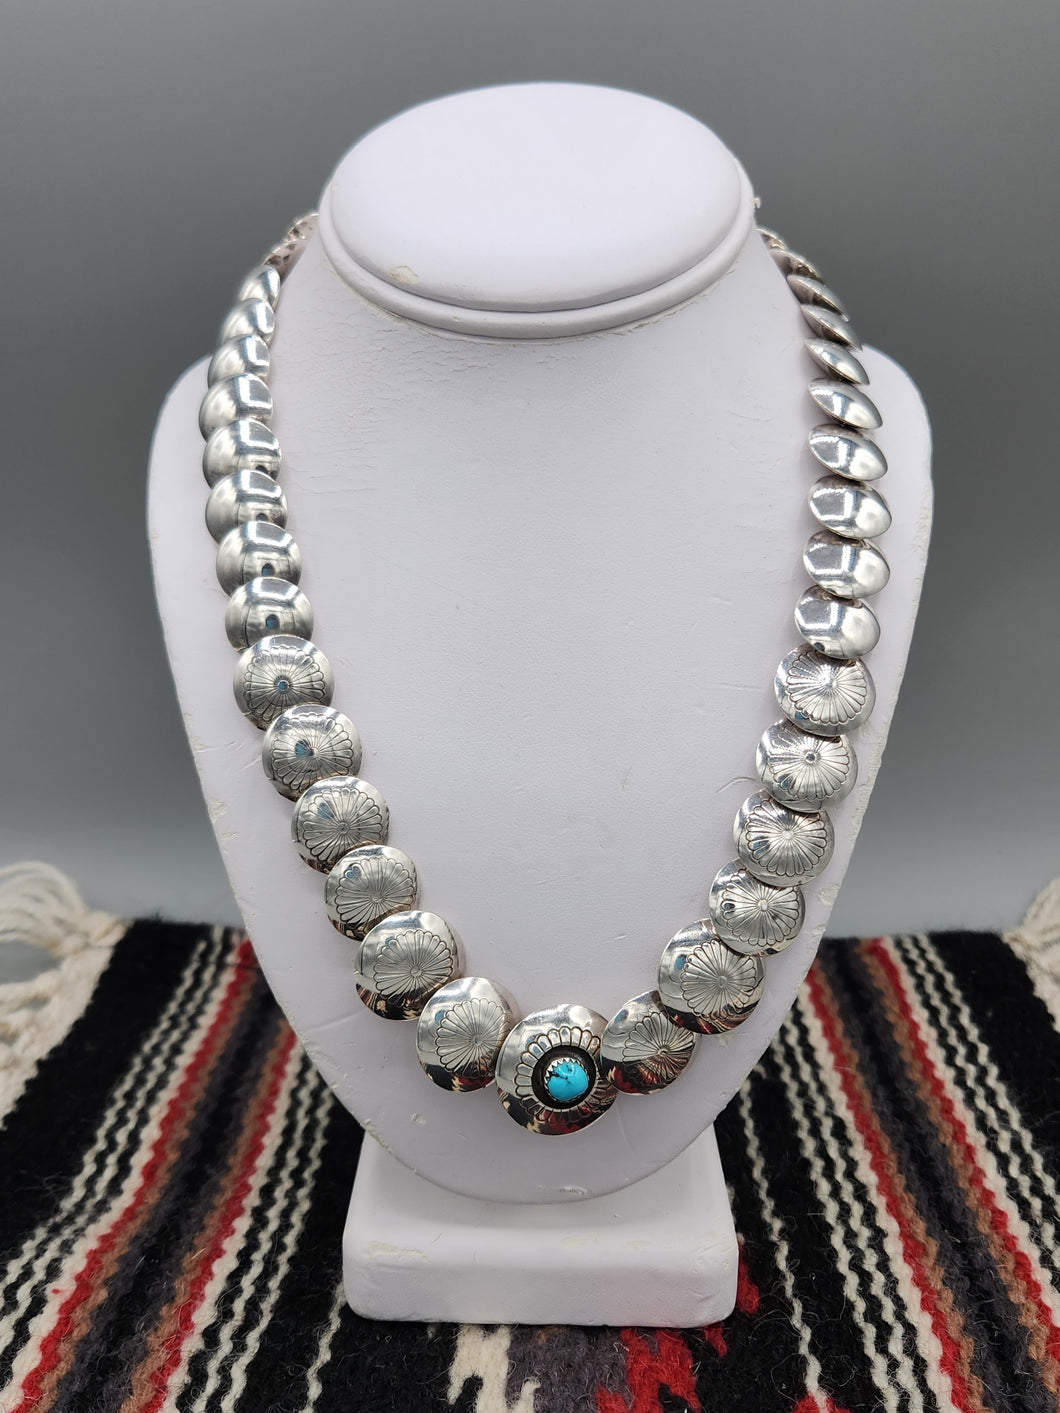 STERLING SILVER 2 SIDED PILLOW BEADED NECKLACE - 20